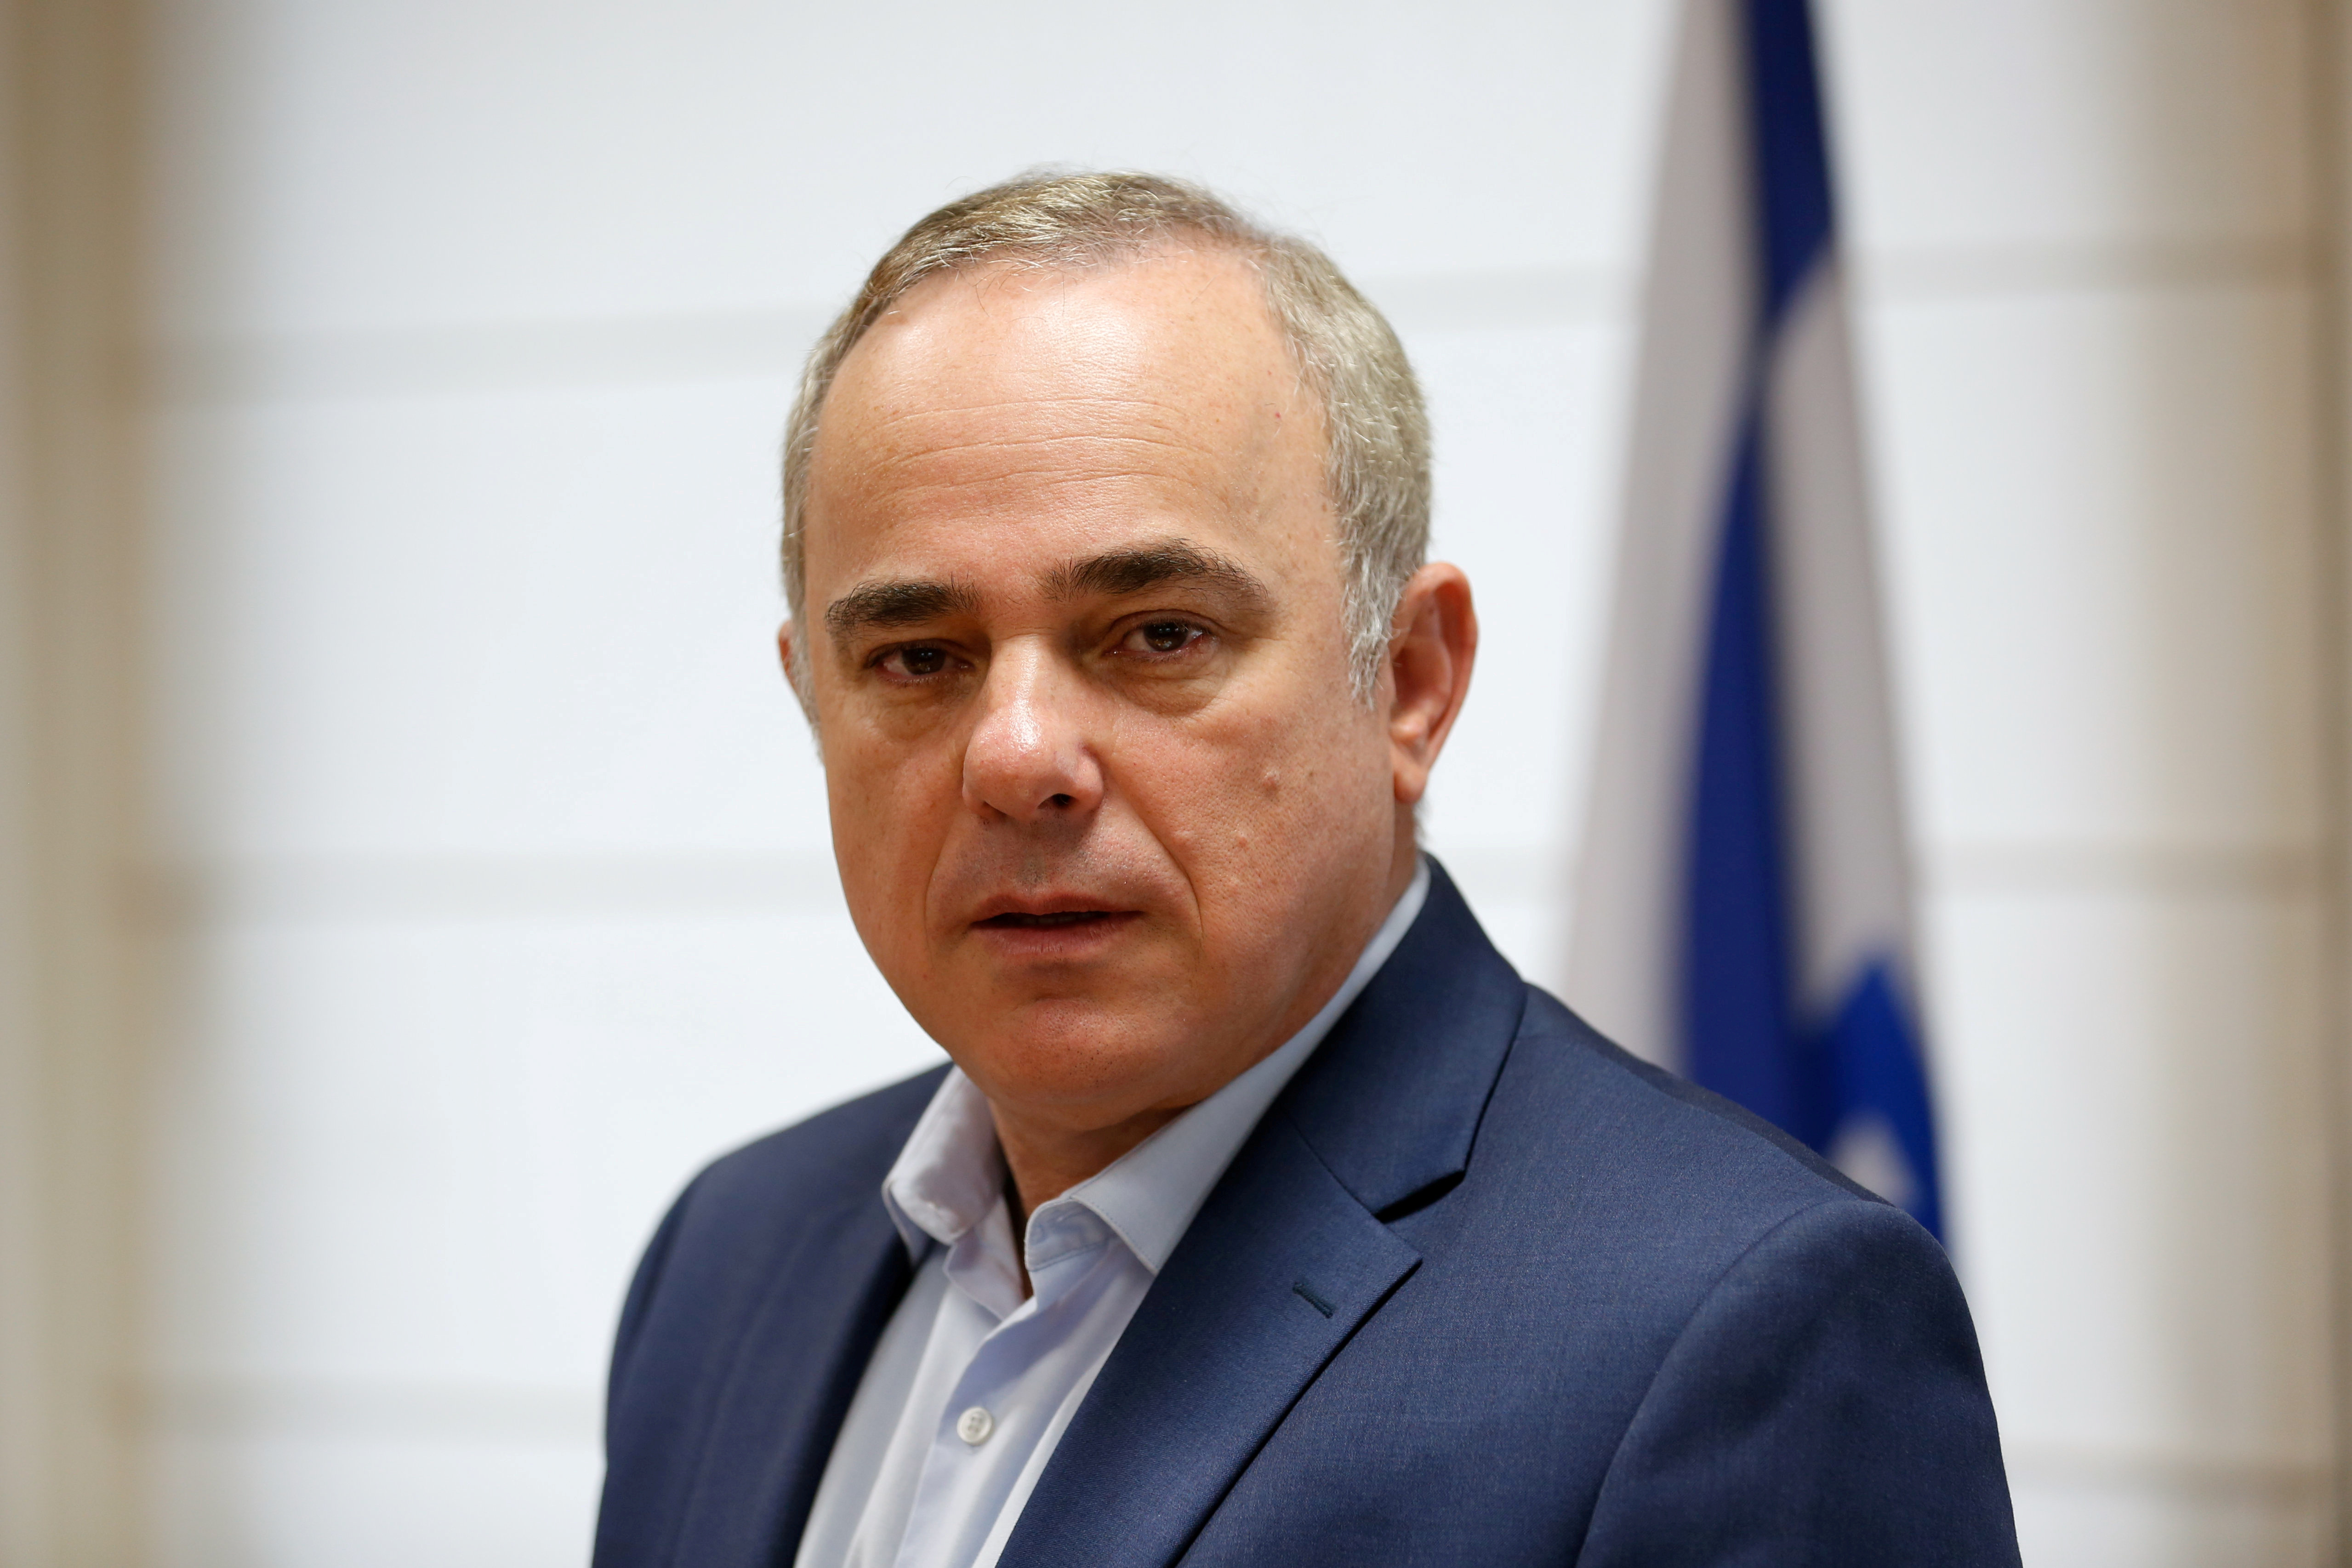 Israel's Energy Minister Yuval Steinitz poses for a photograph during an interview with Reuters, in Jerusalem